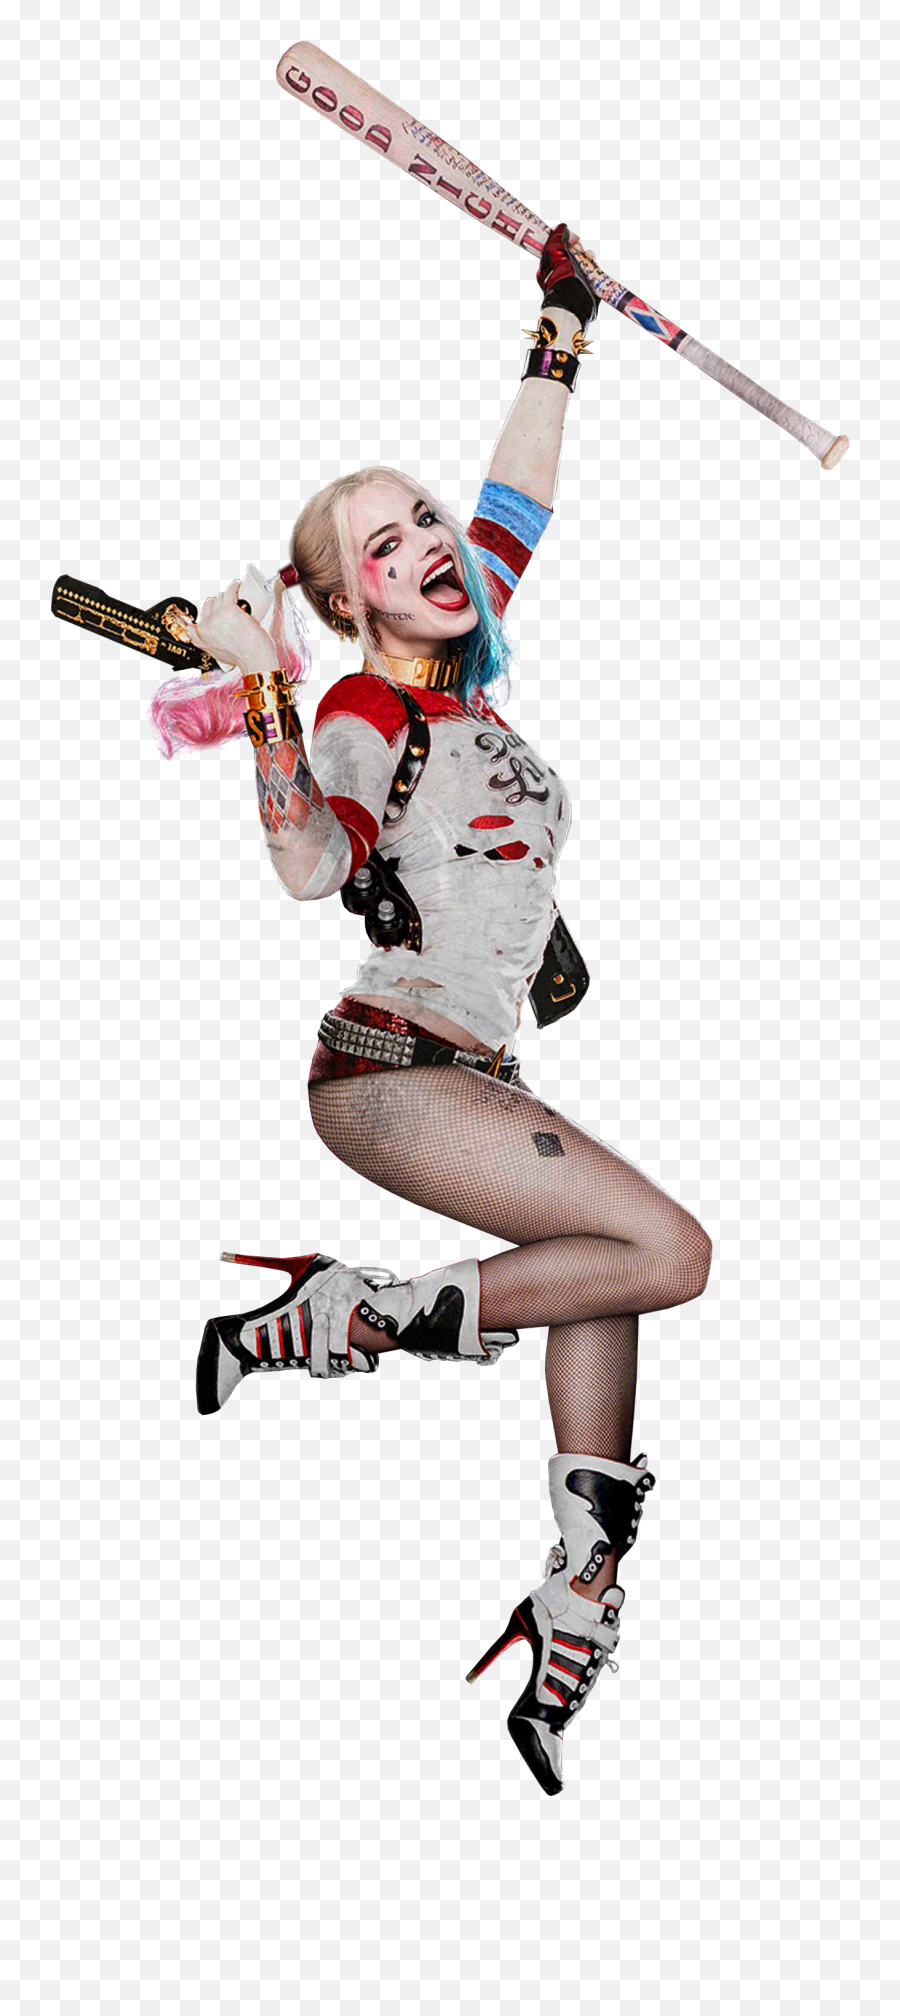 Harley Quinn Suicide Squad Png Image - Harley Quinn Suicide Squad Transparent Background Emoji,The Emojis Harley Quinn Drawings